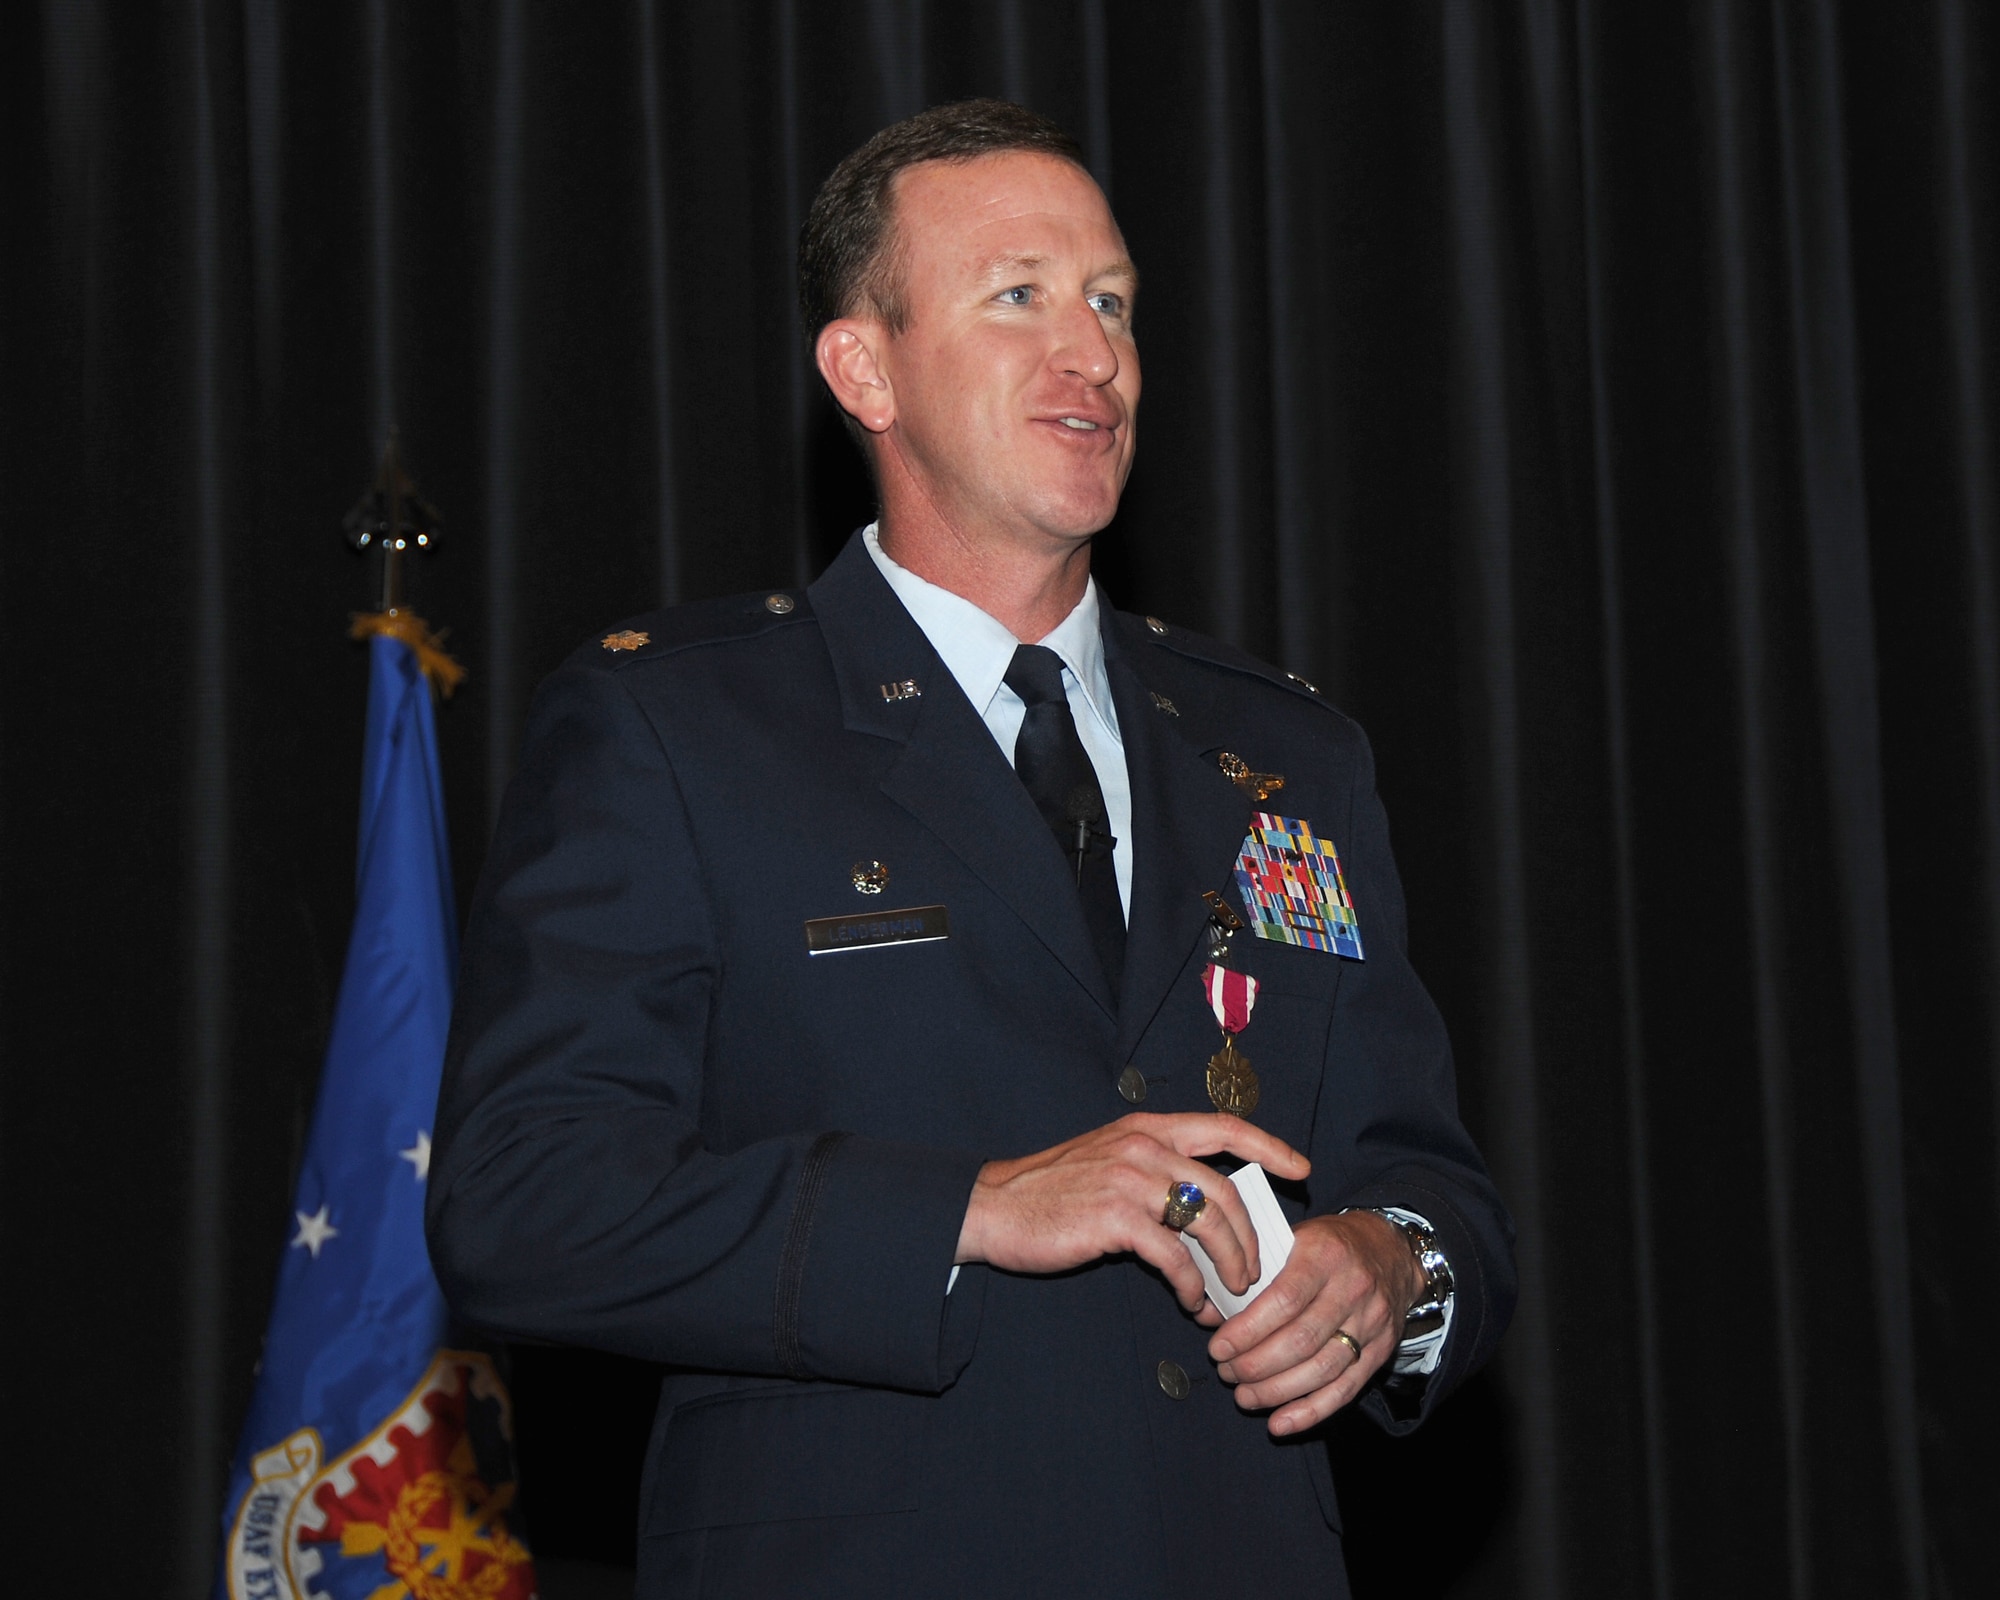 Lt. Col. David Lenderman, former commander of the
421st Combat Training Squadron, addresses the squadron for a final time
during the 421st CTS change-of-command ceremony June 24 at the U.S. Air
Force Expeditionary Center on Joint Base McGuire-Dix-Lakehurst, N.J. (U.S.
Air Force photo by Staff Sgt. Nathan Bevier/Released)
